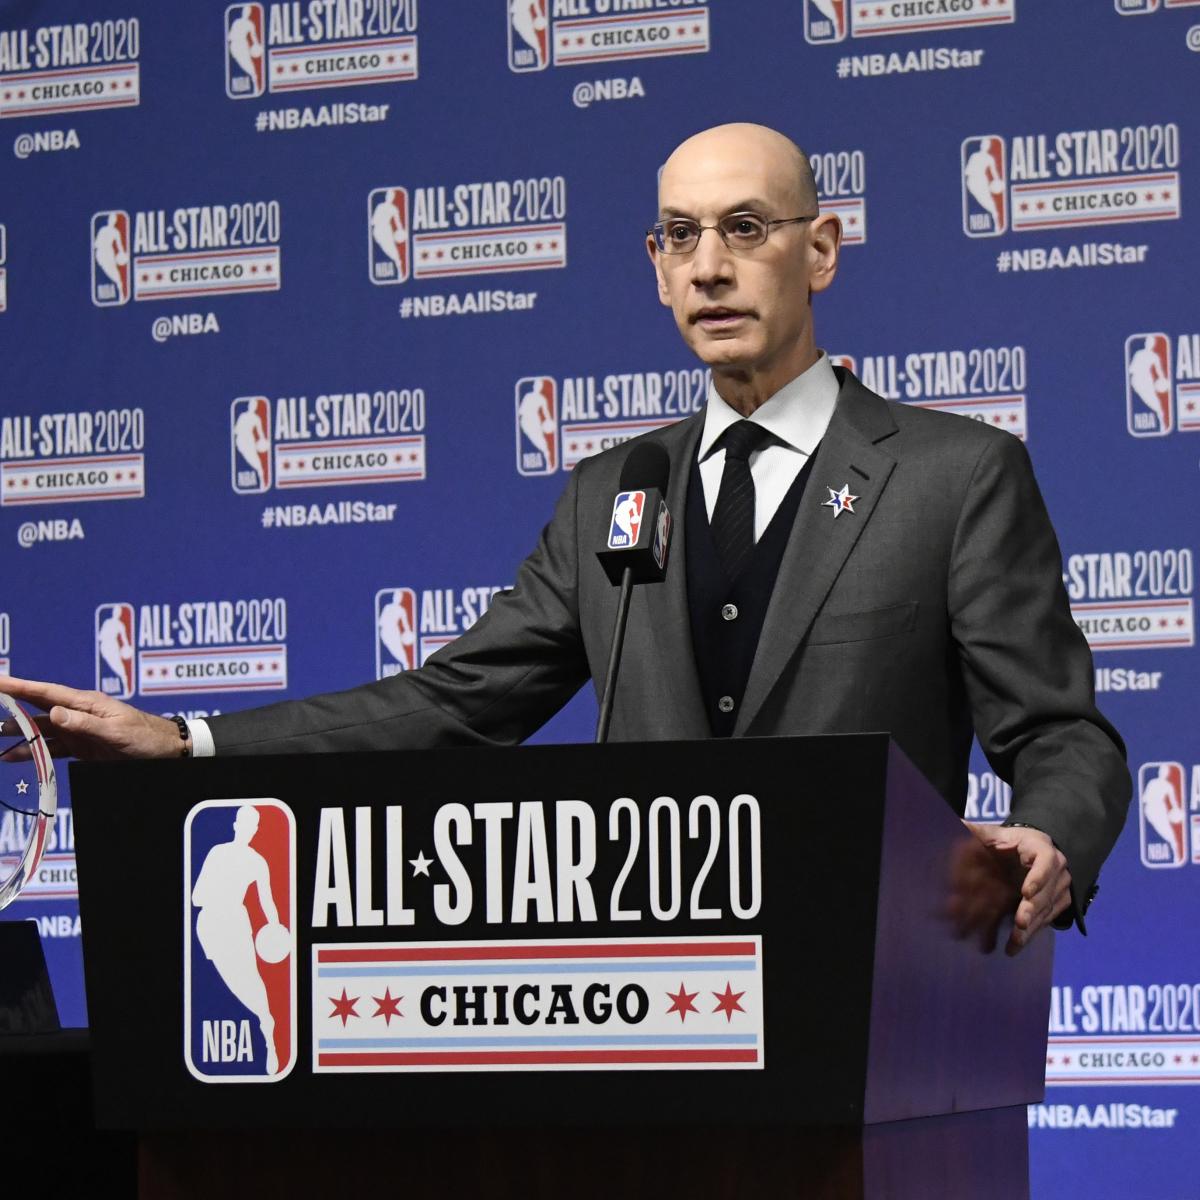 NBA Awards Reportedly to Be Based on Play Before League Suspended March 11 thumbnail